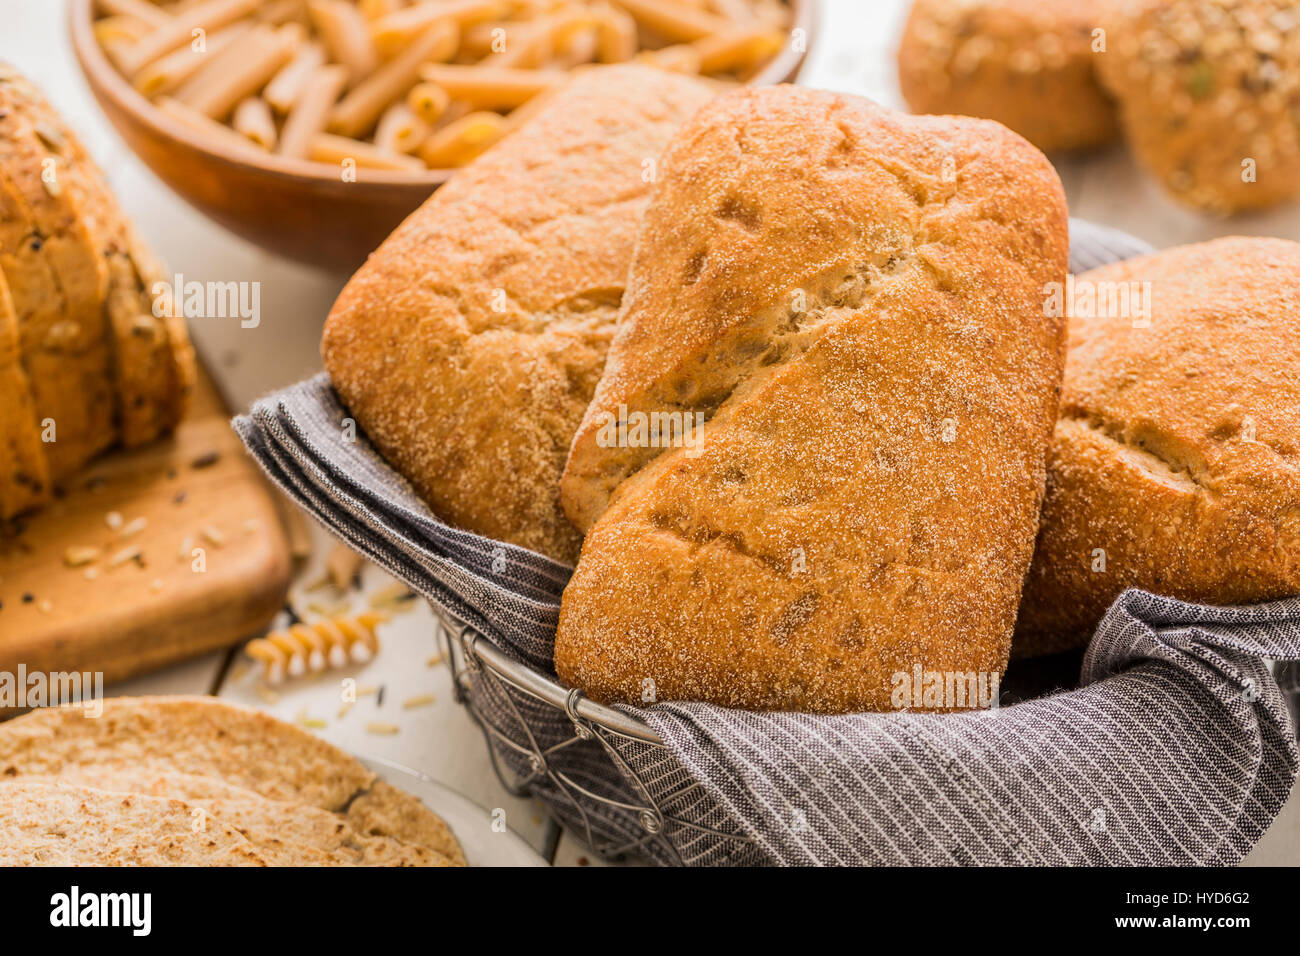 Buns in basket Stock Photo